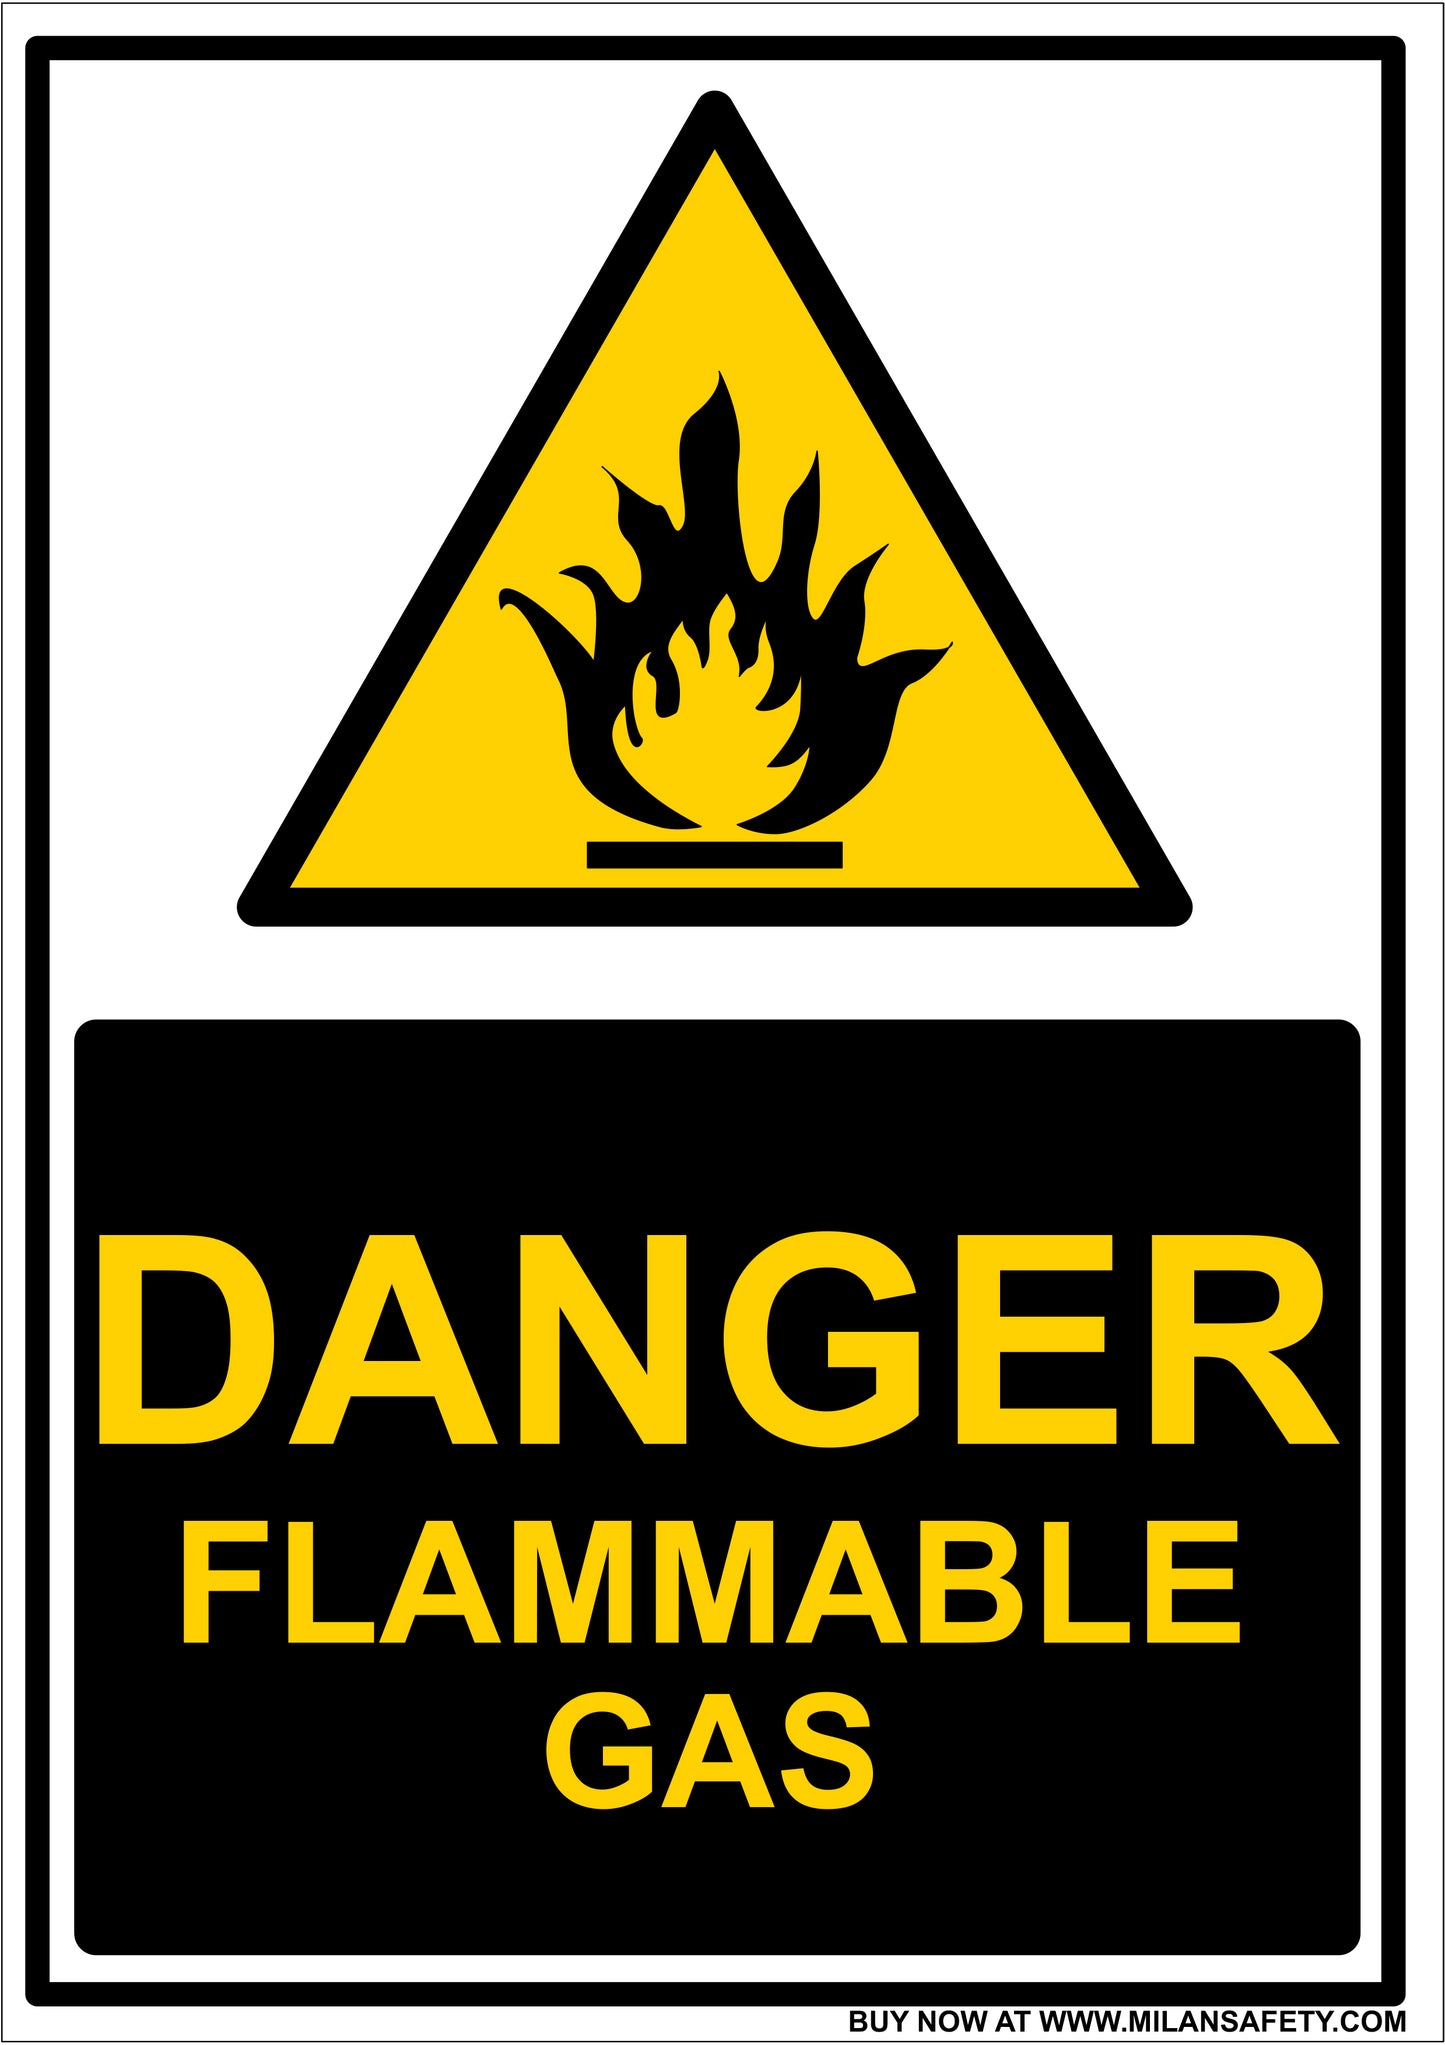 Danger flammable gas signage